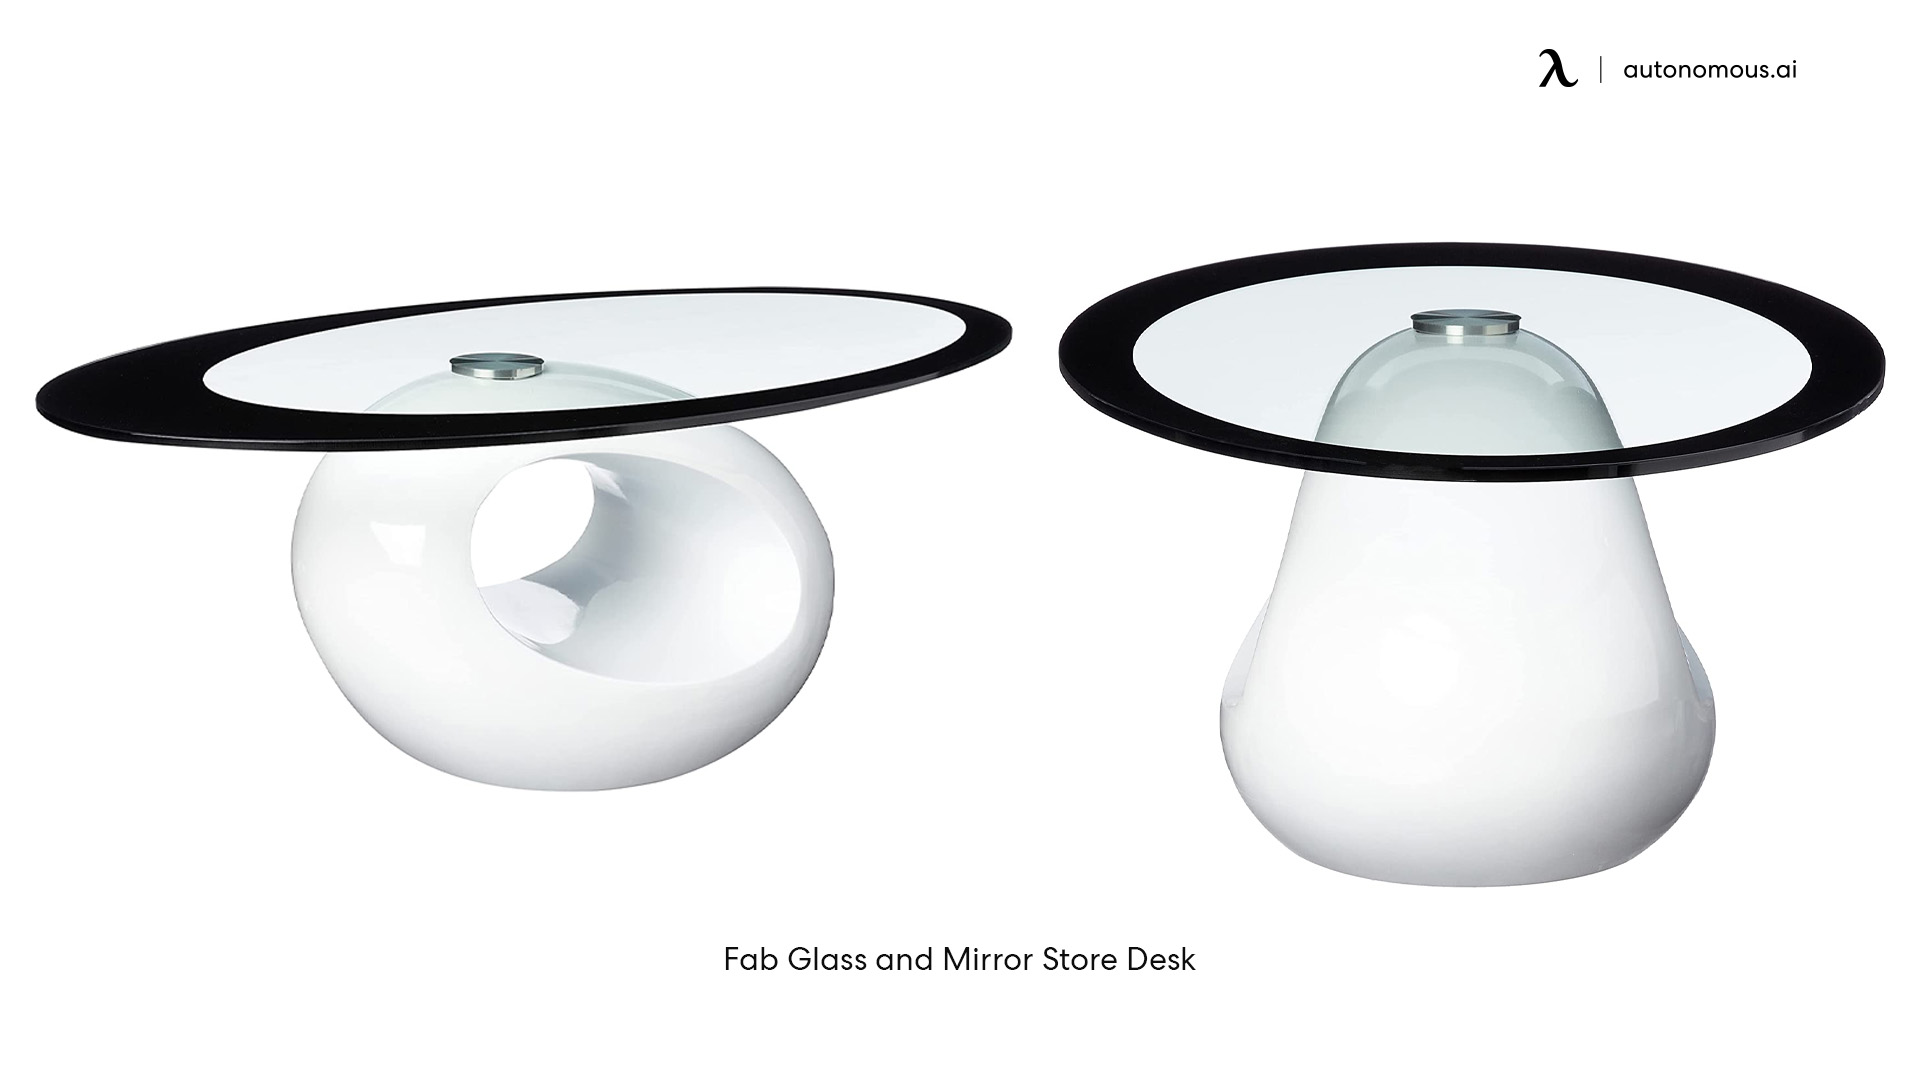 Fab Glass and Mirror Store Desk